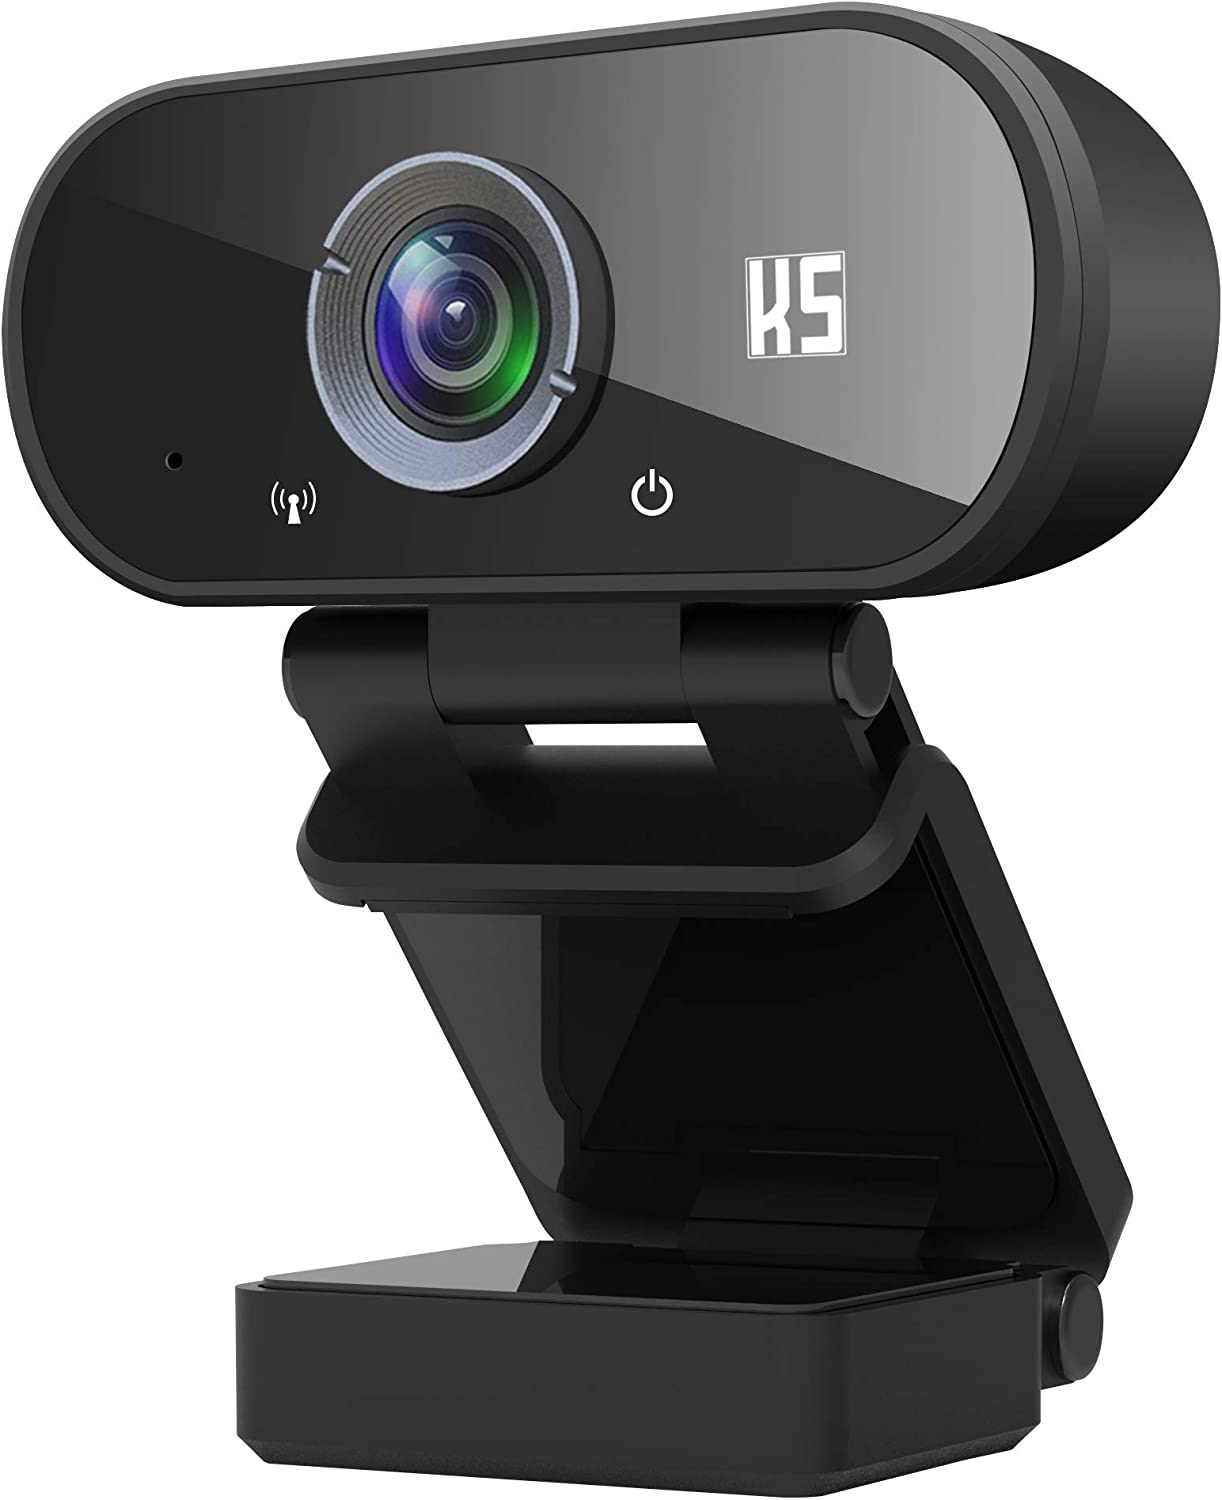 Webcam HD 1080P Video, Buit-in Microphone, Computer USB Web Cam with Tripod and Privacy Cover,